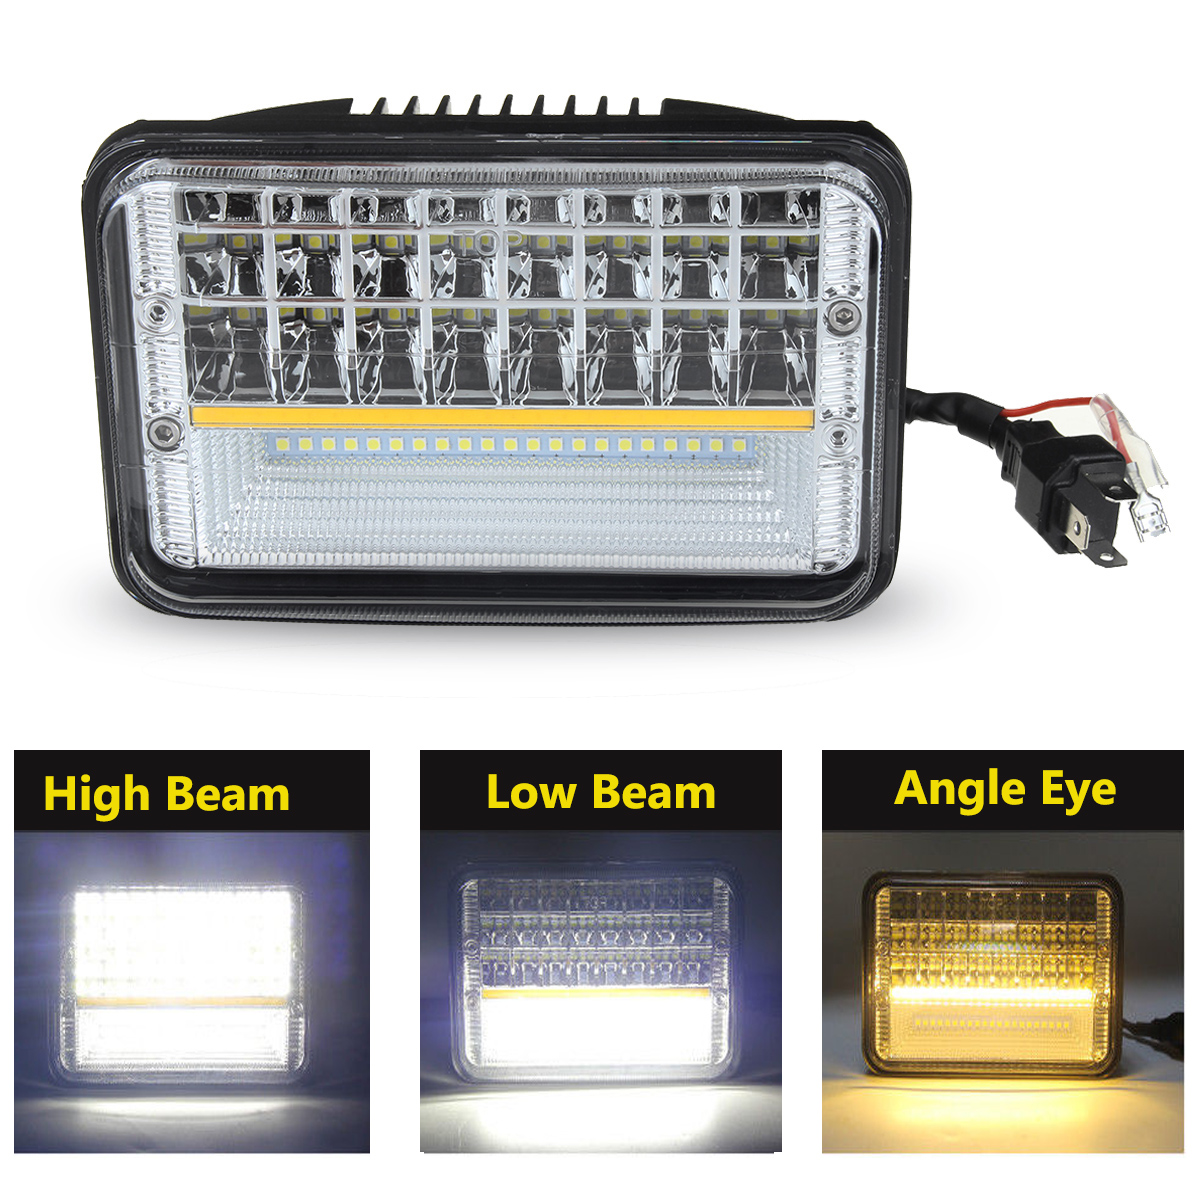 1PCS-4quotx6quot-H4-10V-30V-45W-6000K-High-Low-Beam-LED-Headlights-DRL-for-OFF-Road-Tractor-Truck-1302196